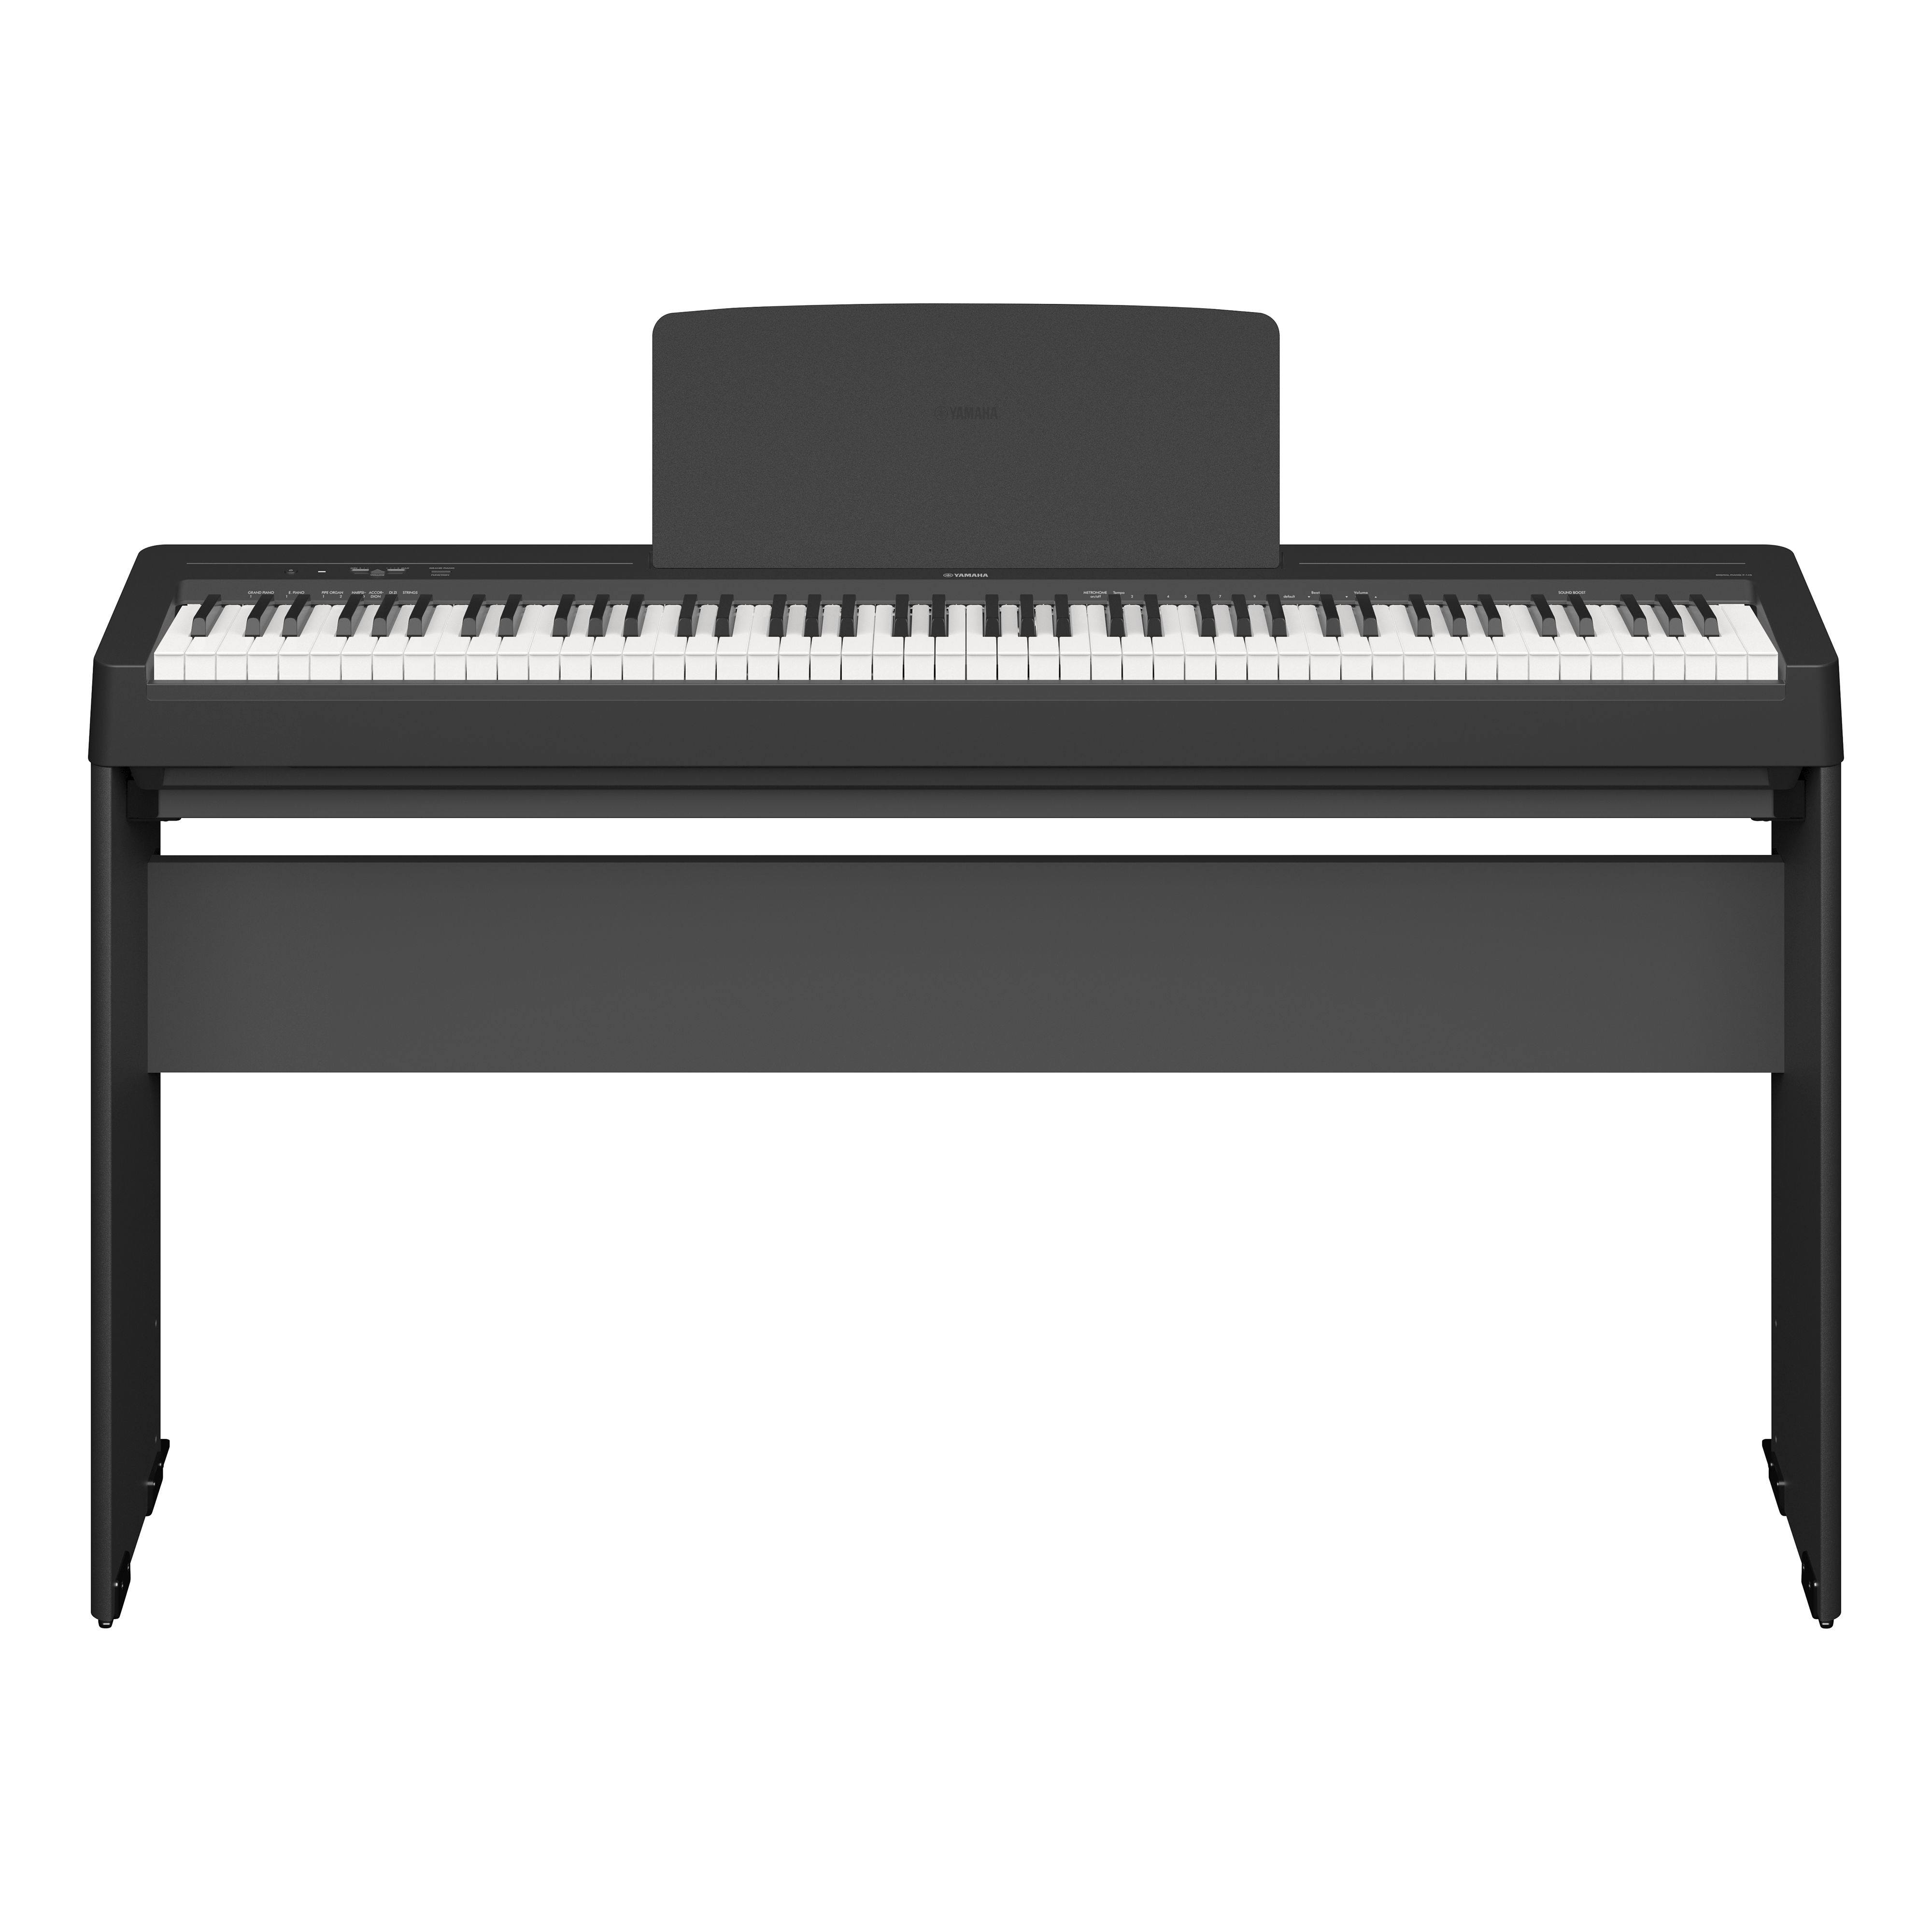 P-145 - Overview - P Series - Pianos - Musical Instruments - Products -  Yamaha - Other European Countries